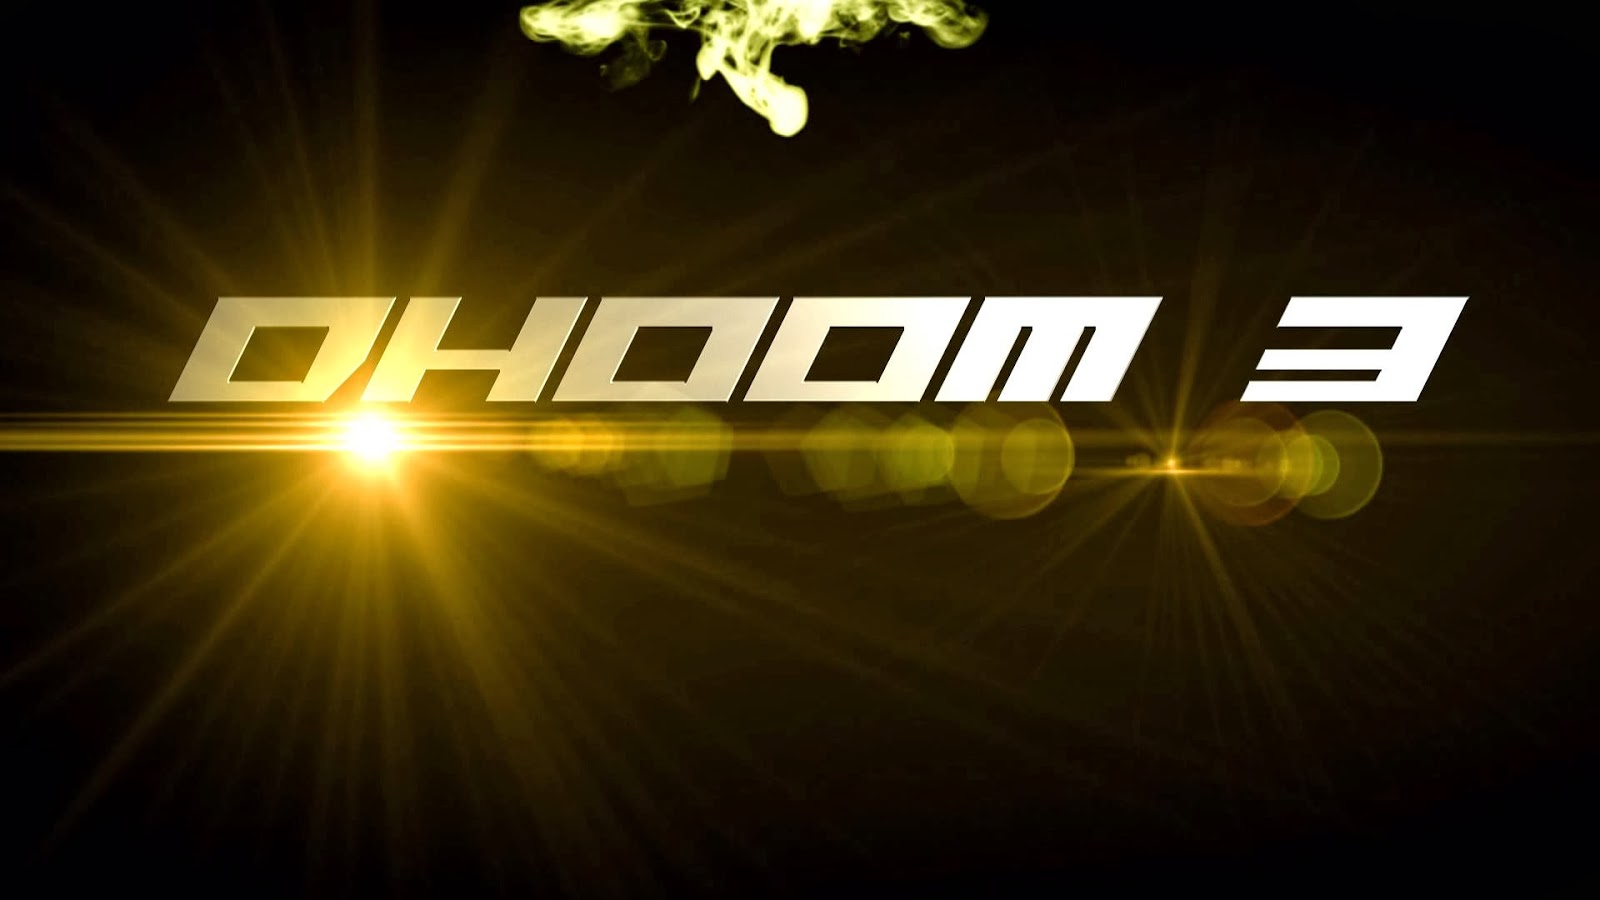 dhoom 2 full movie in tamil dubbed free download hd 1080p